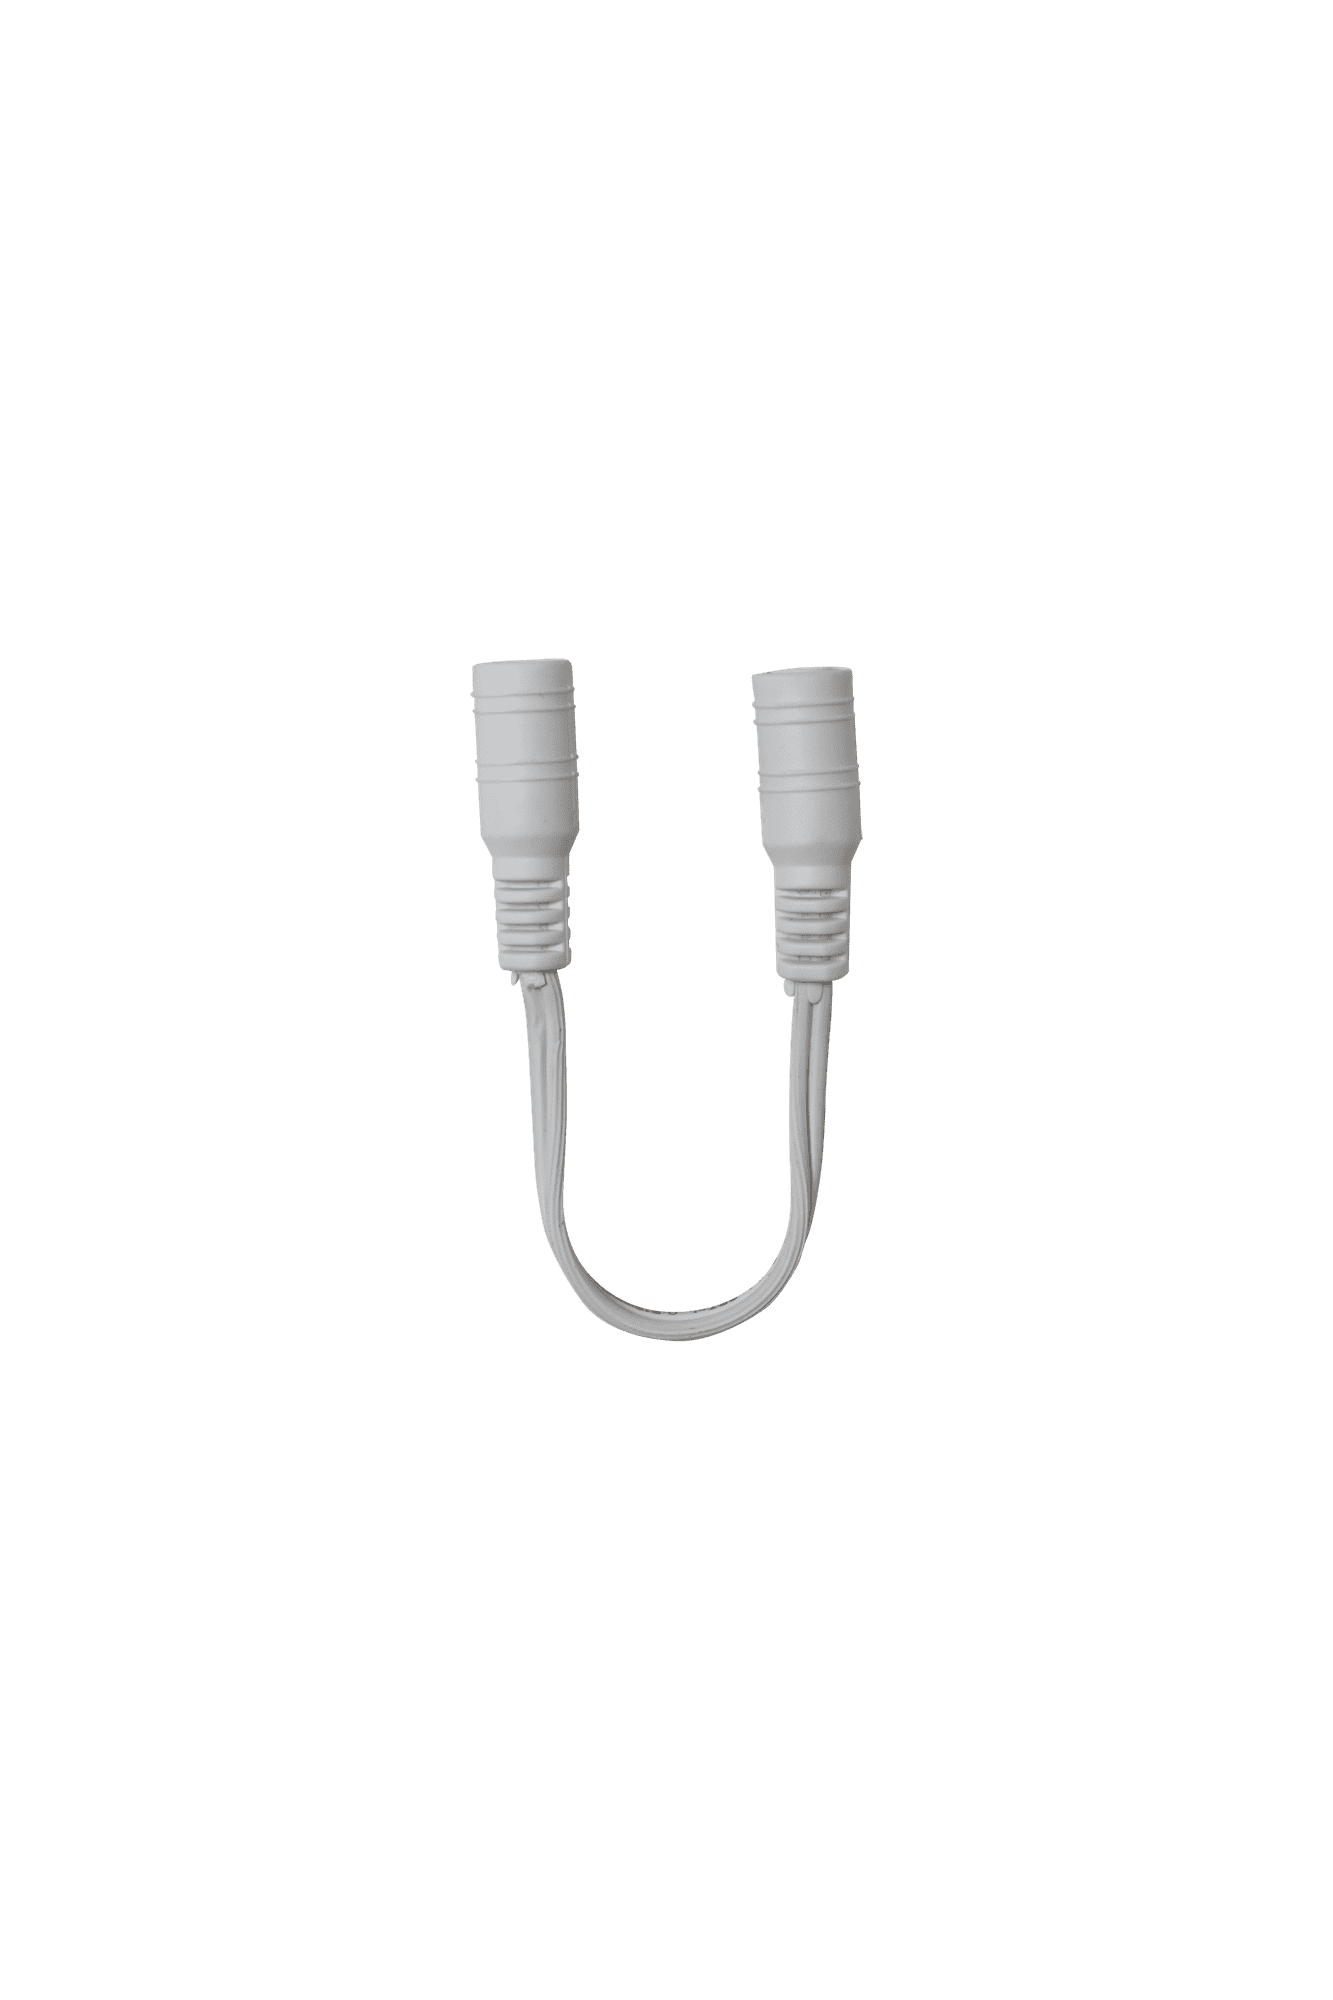 991733_adaptercable_300